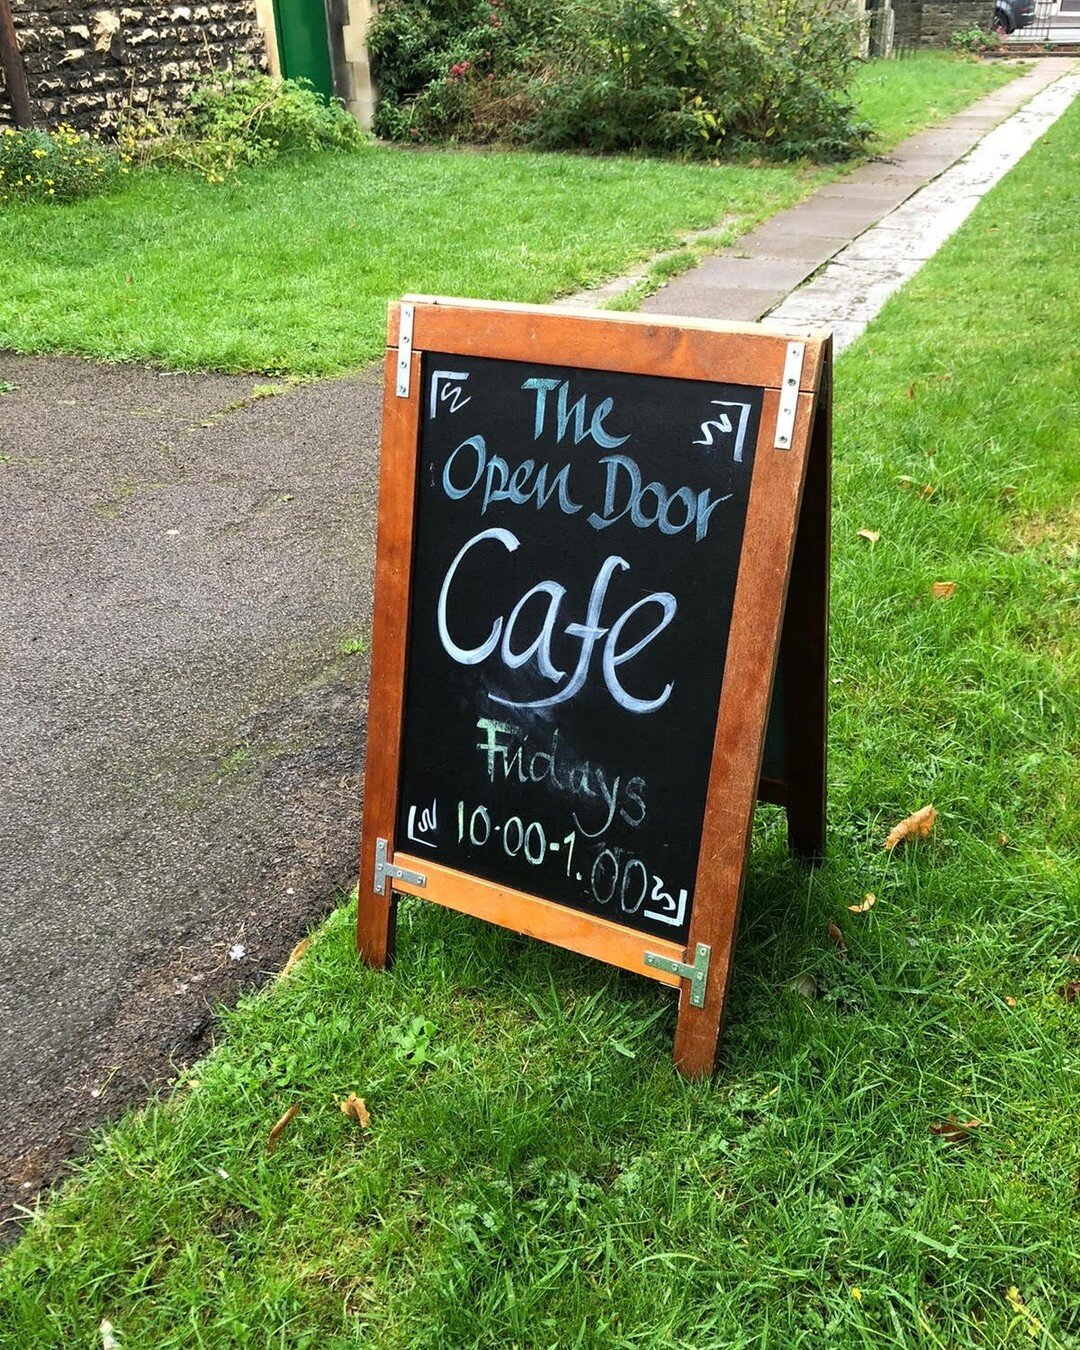 Our weekly Friday caf&eacute; is open to the public from 10:00 to 1:00! All of the proceeds go directly to Open Door! ☕

We hope to see you there soon! 🚪✅